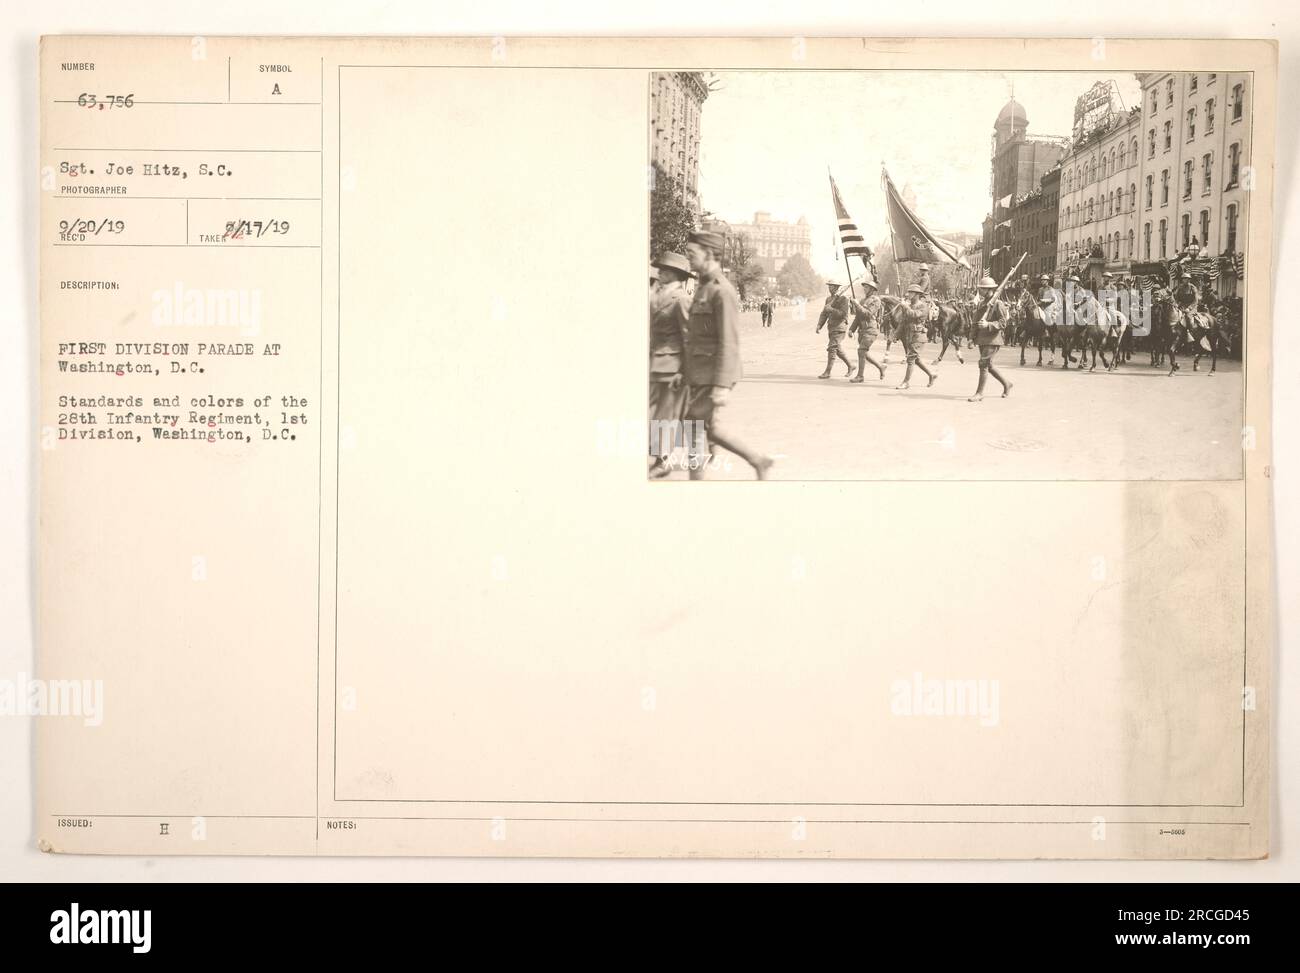 A photograph featuring a parade of the First Division in Washington, D.C. The image shows the standards and colors of the 28th Infantry Regiment, 1st Division. Sergeant Joe Hitz took the photo on February 20, 1919. The description indicates the presence of 63,756 men in the parade. Stock Photo